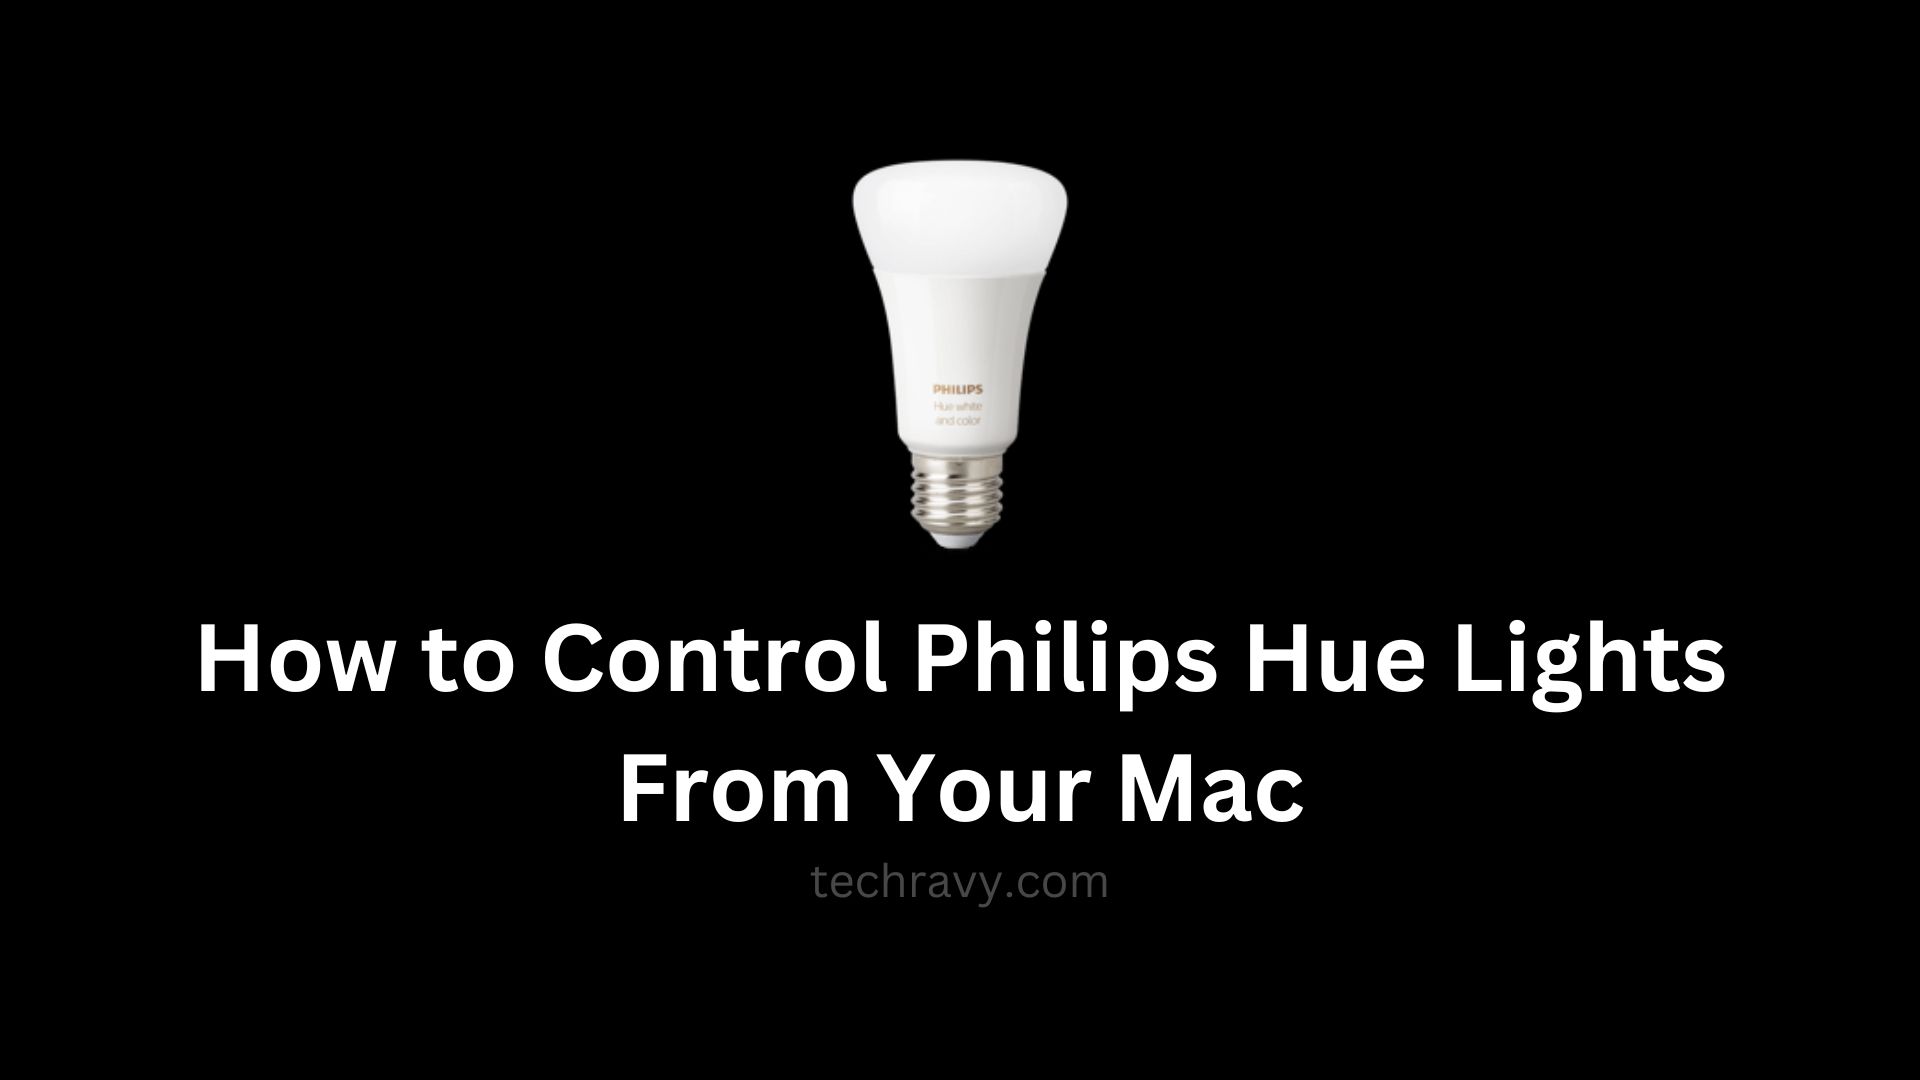 How to Control Philips Hue Lights From Your Mac